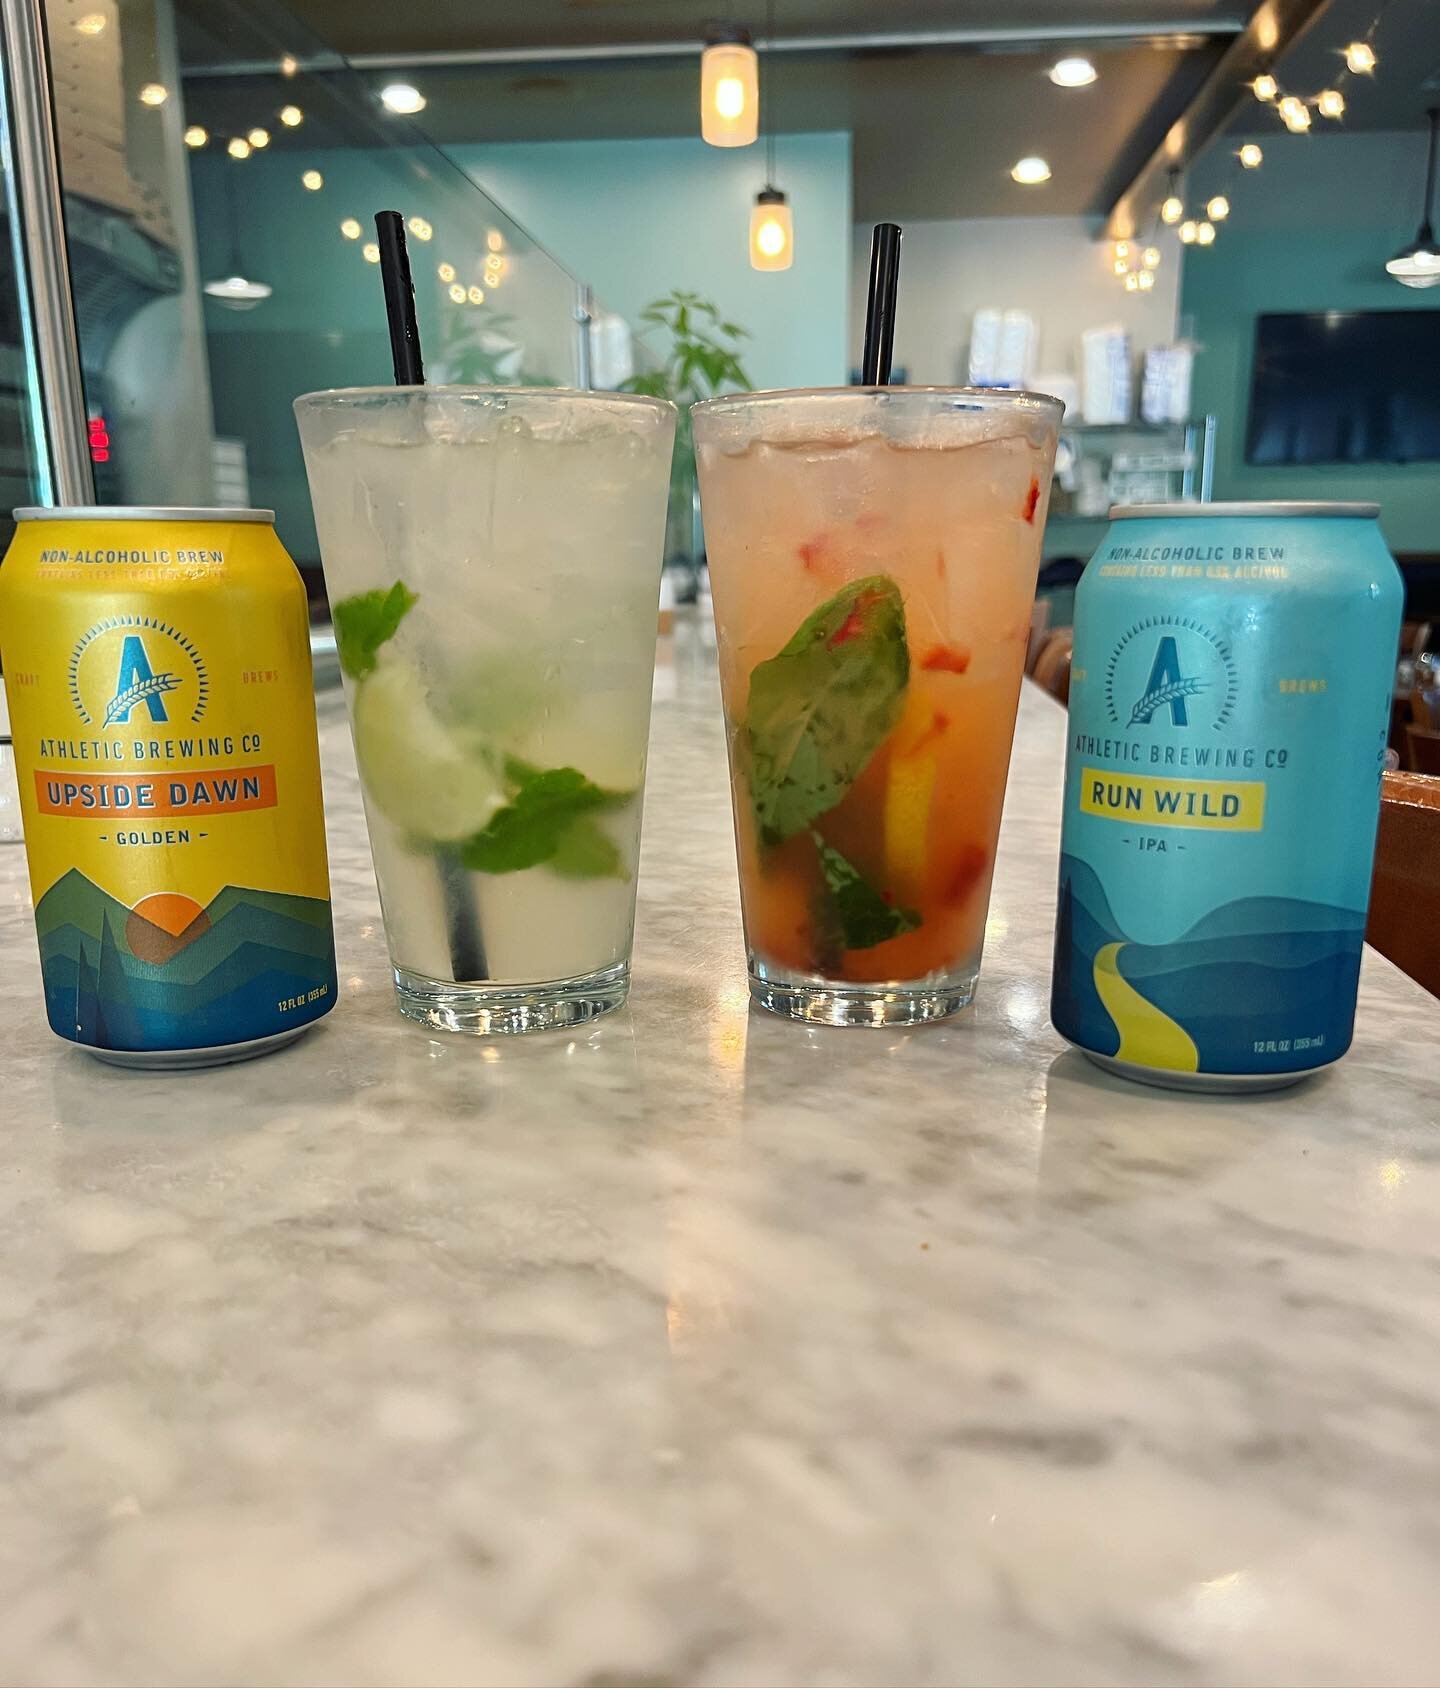 Today we&rsquo;re introducing some of our nonalcoholic options!
We have added mocktails and nonalcoholic beer.
Pool Day: a refreshing spritzer with lime and mint
Strawberry Fields: Lemonade with muddled strawberry and basil
Athletic Beer: Golden Ale 